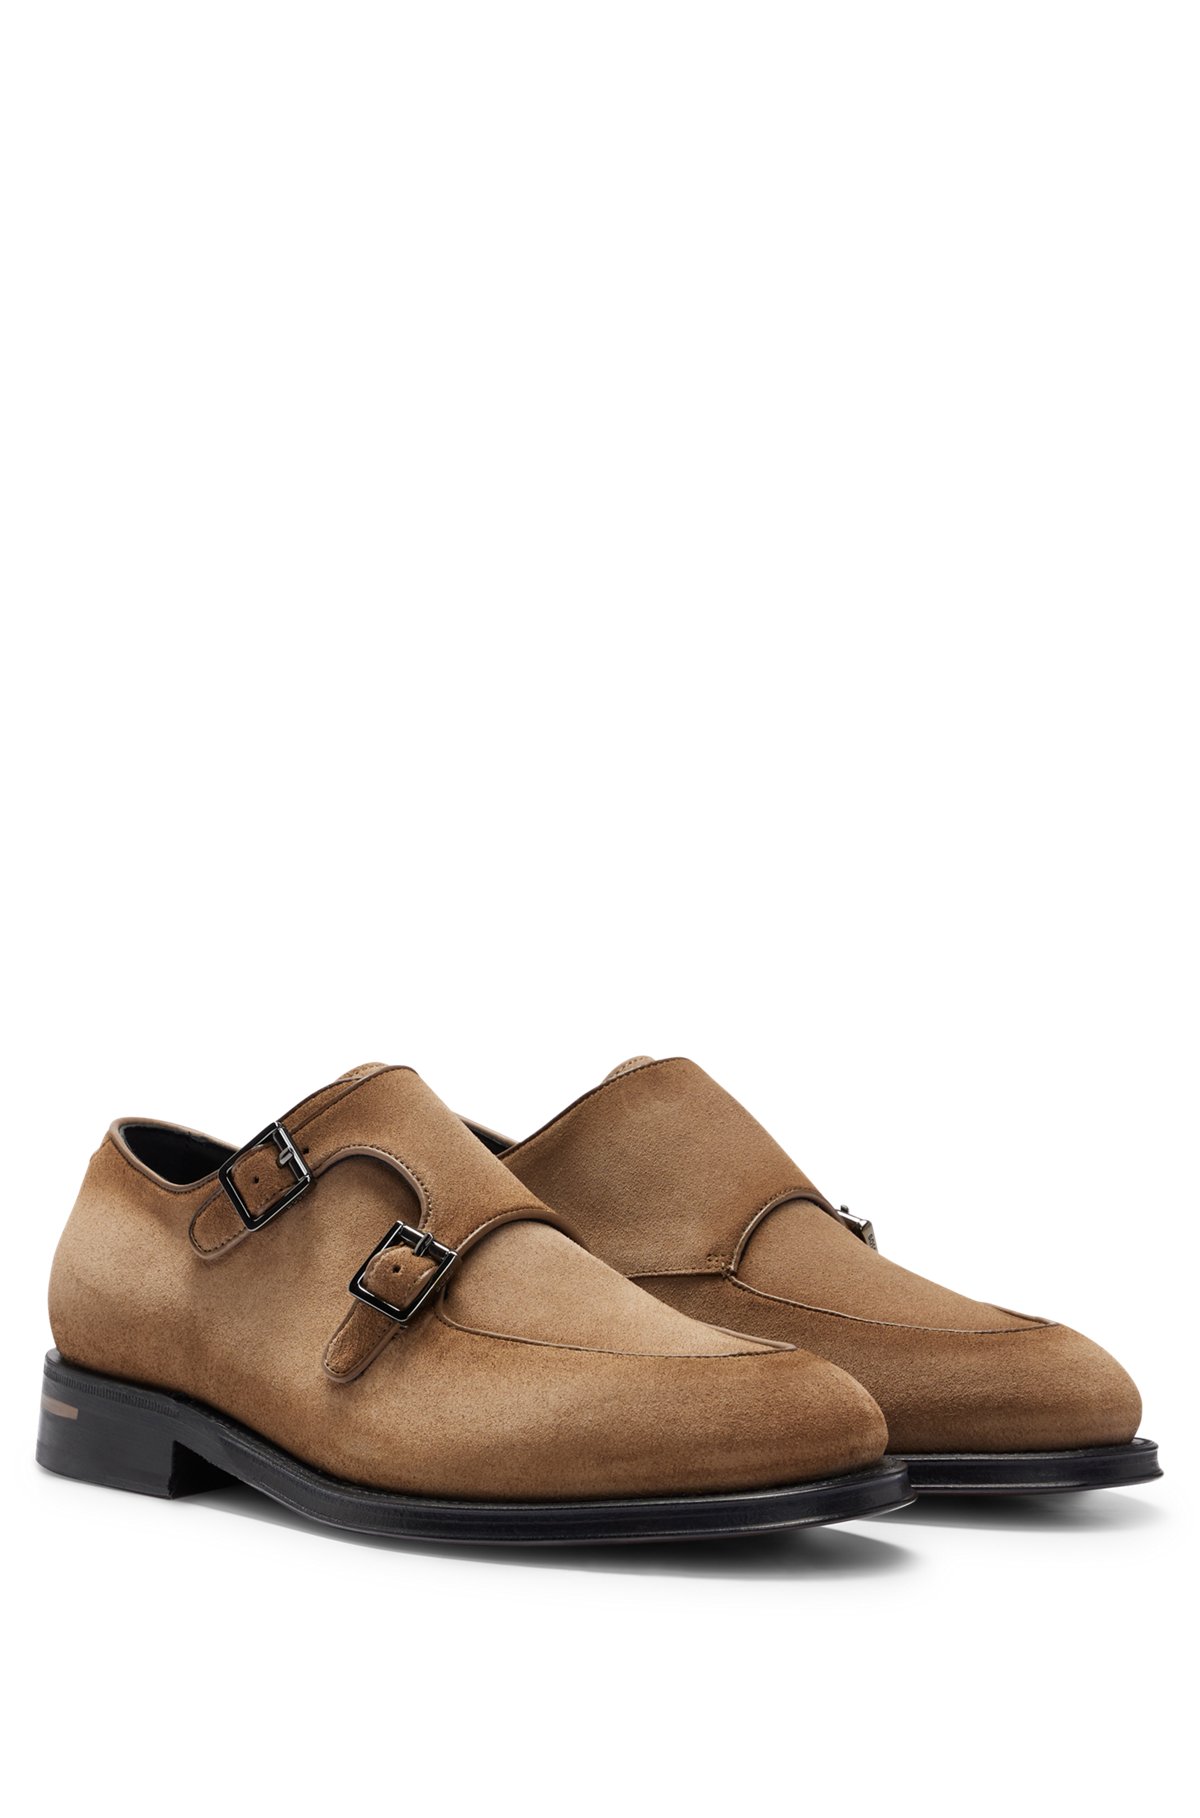 BOSS - Shaded-suede double-monk shoes with branded buckles